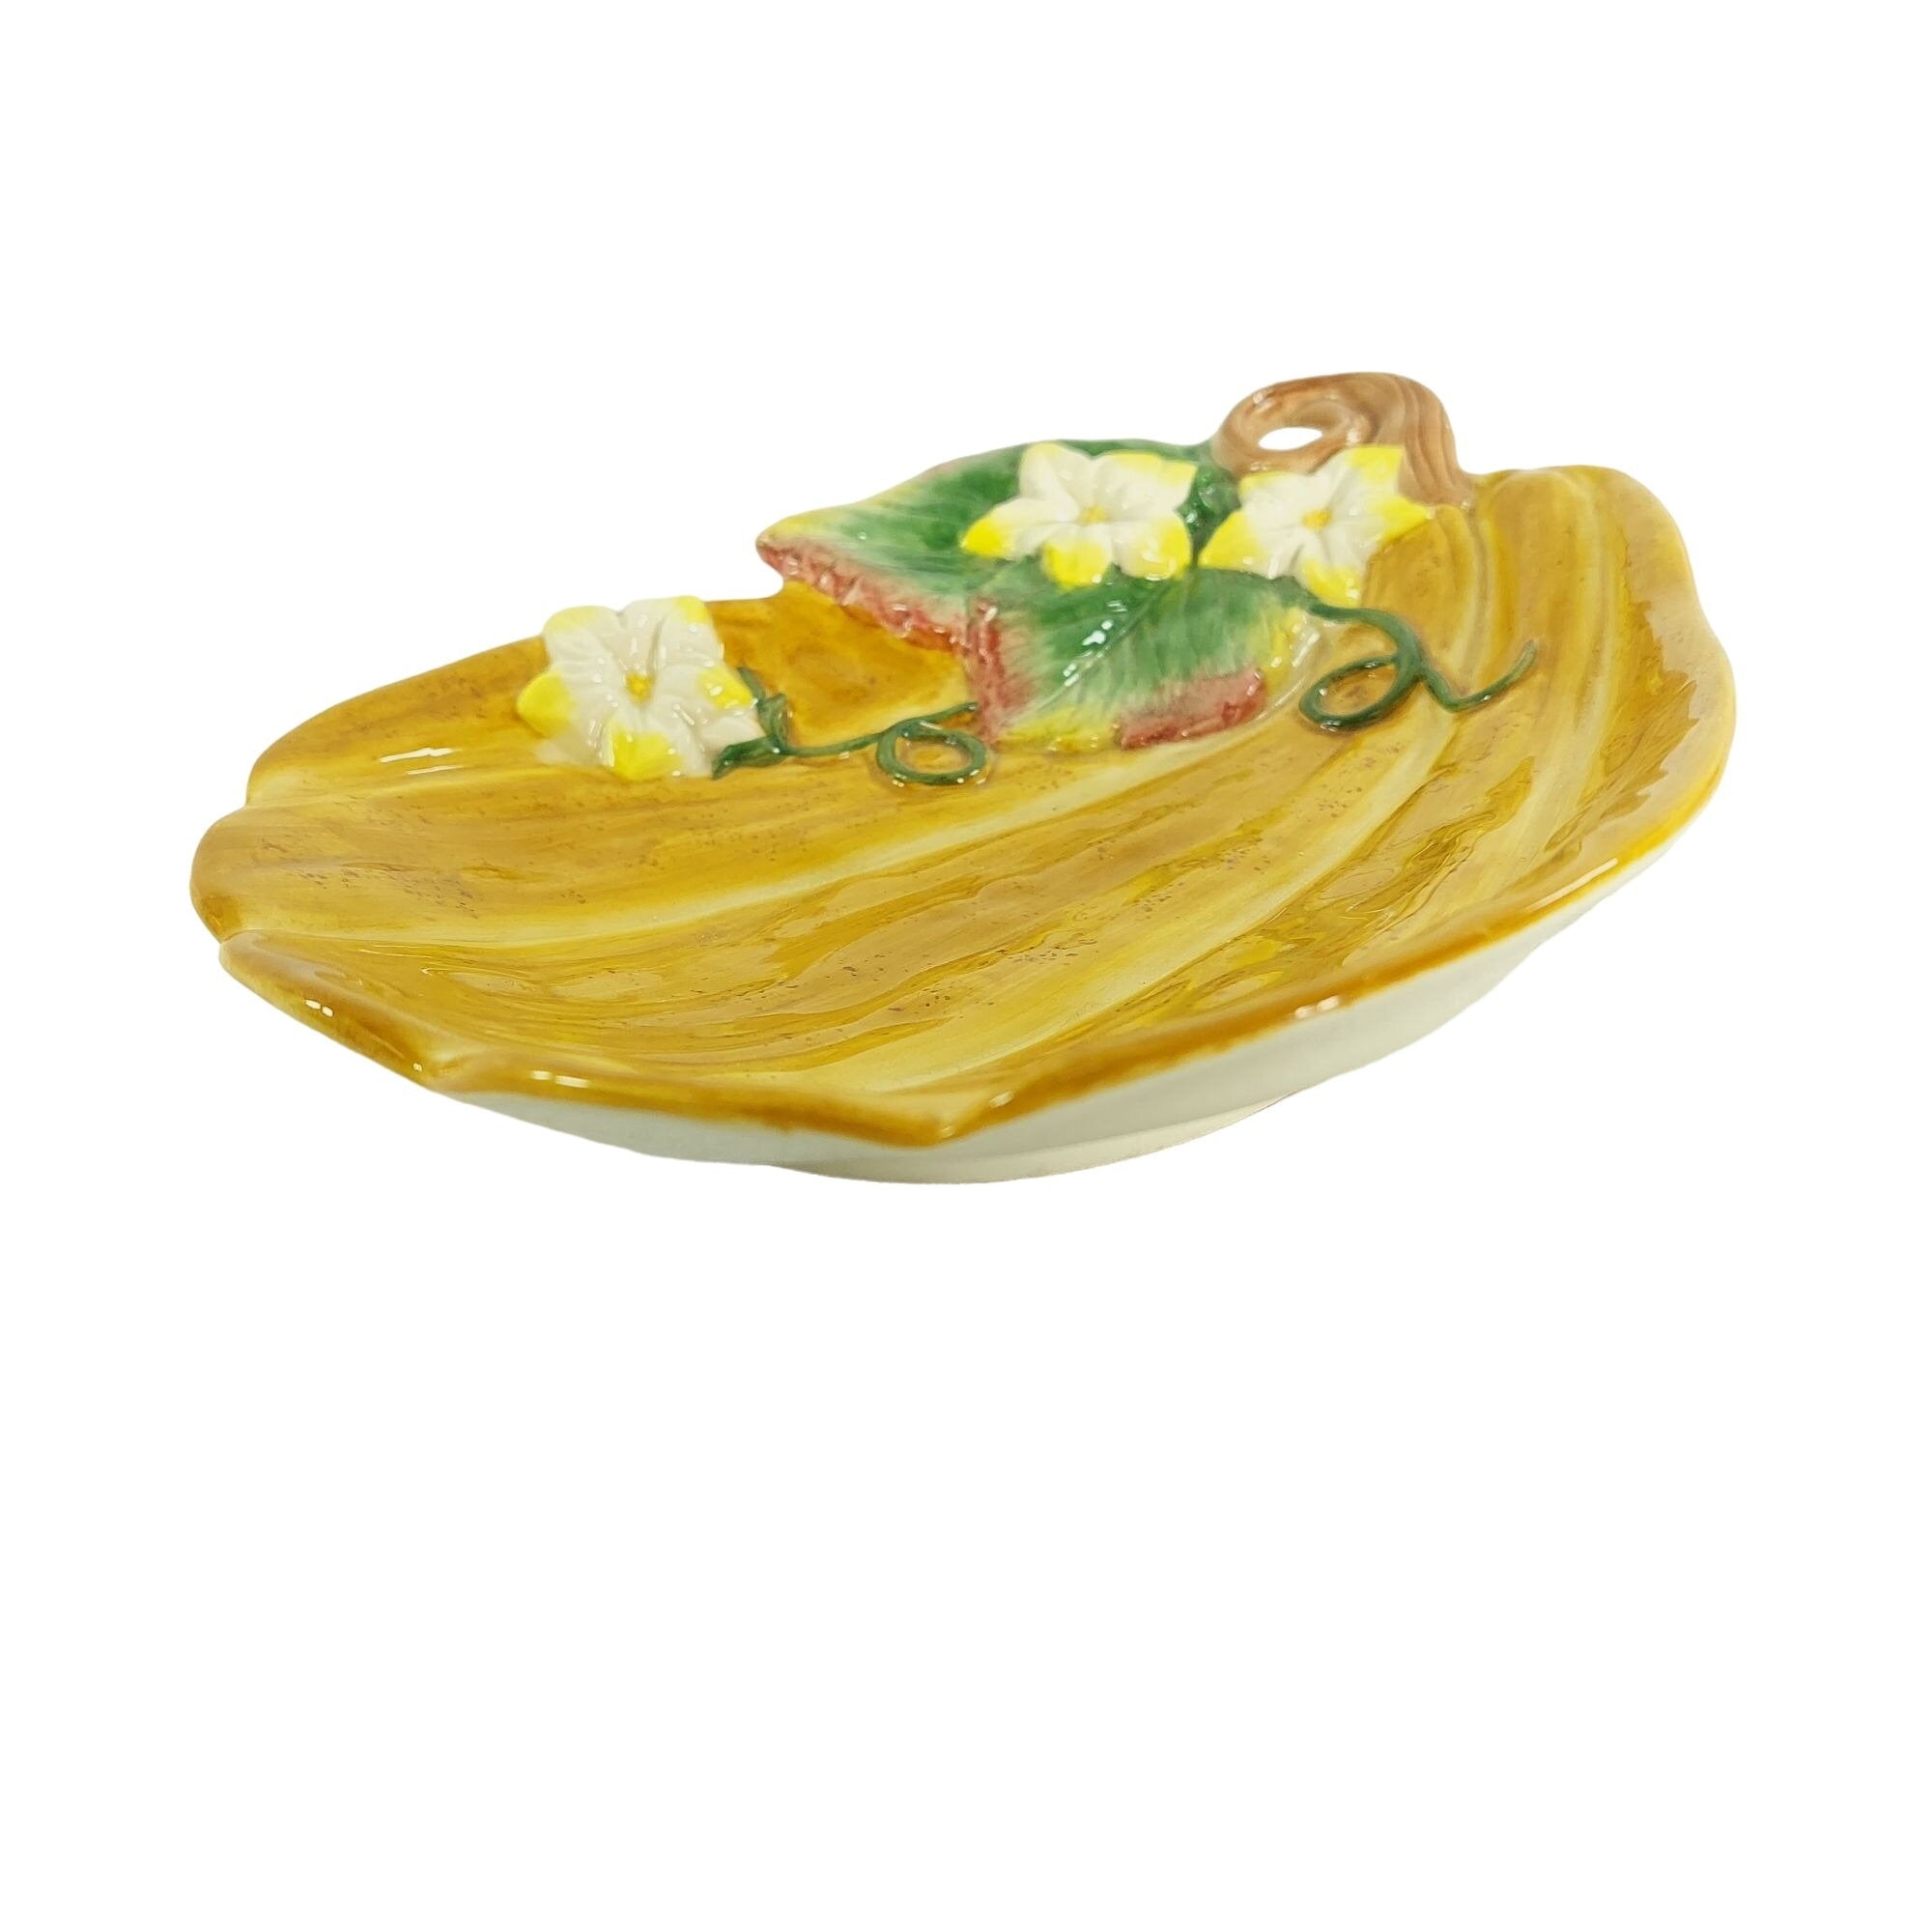 Condiment Serving Dish Fitz and Floyd Classics Autumn Gourd With Flowers Vintage 9"